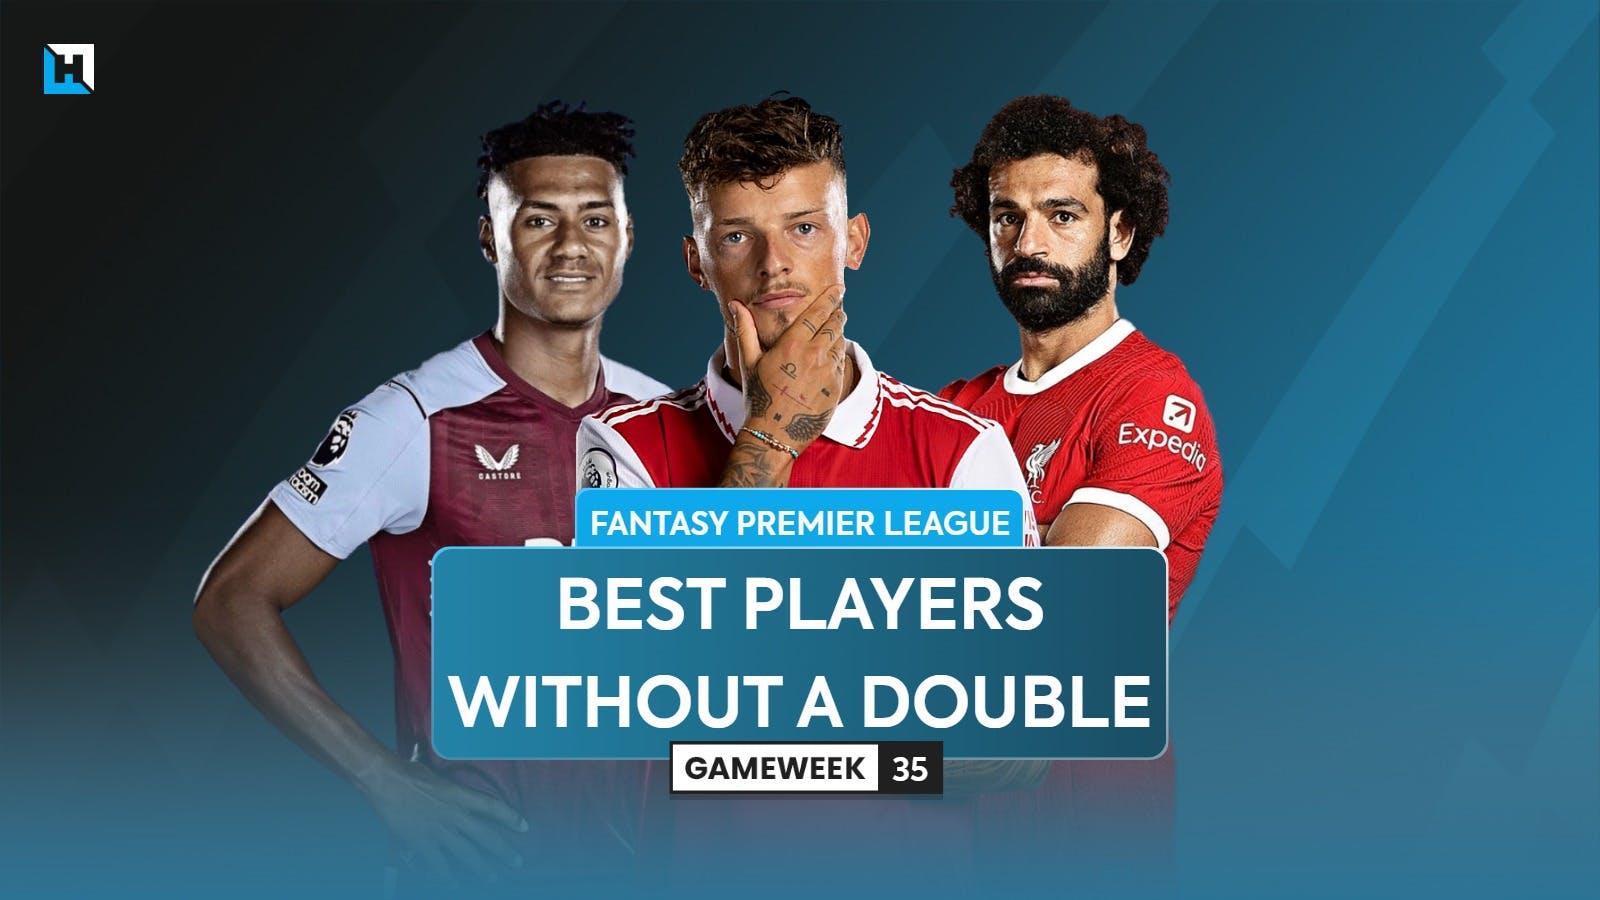 The best FPL players without a double gameweek to consider keeping